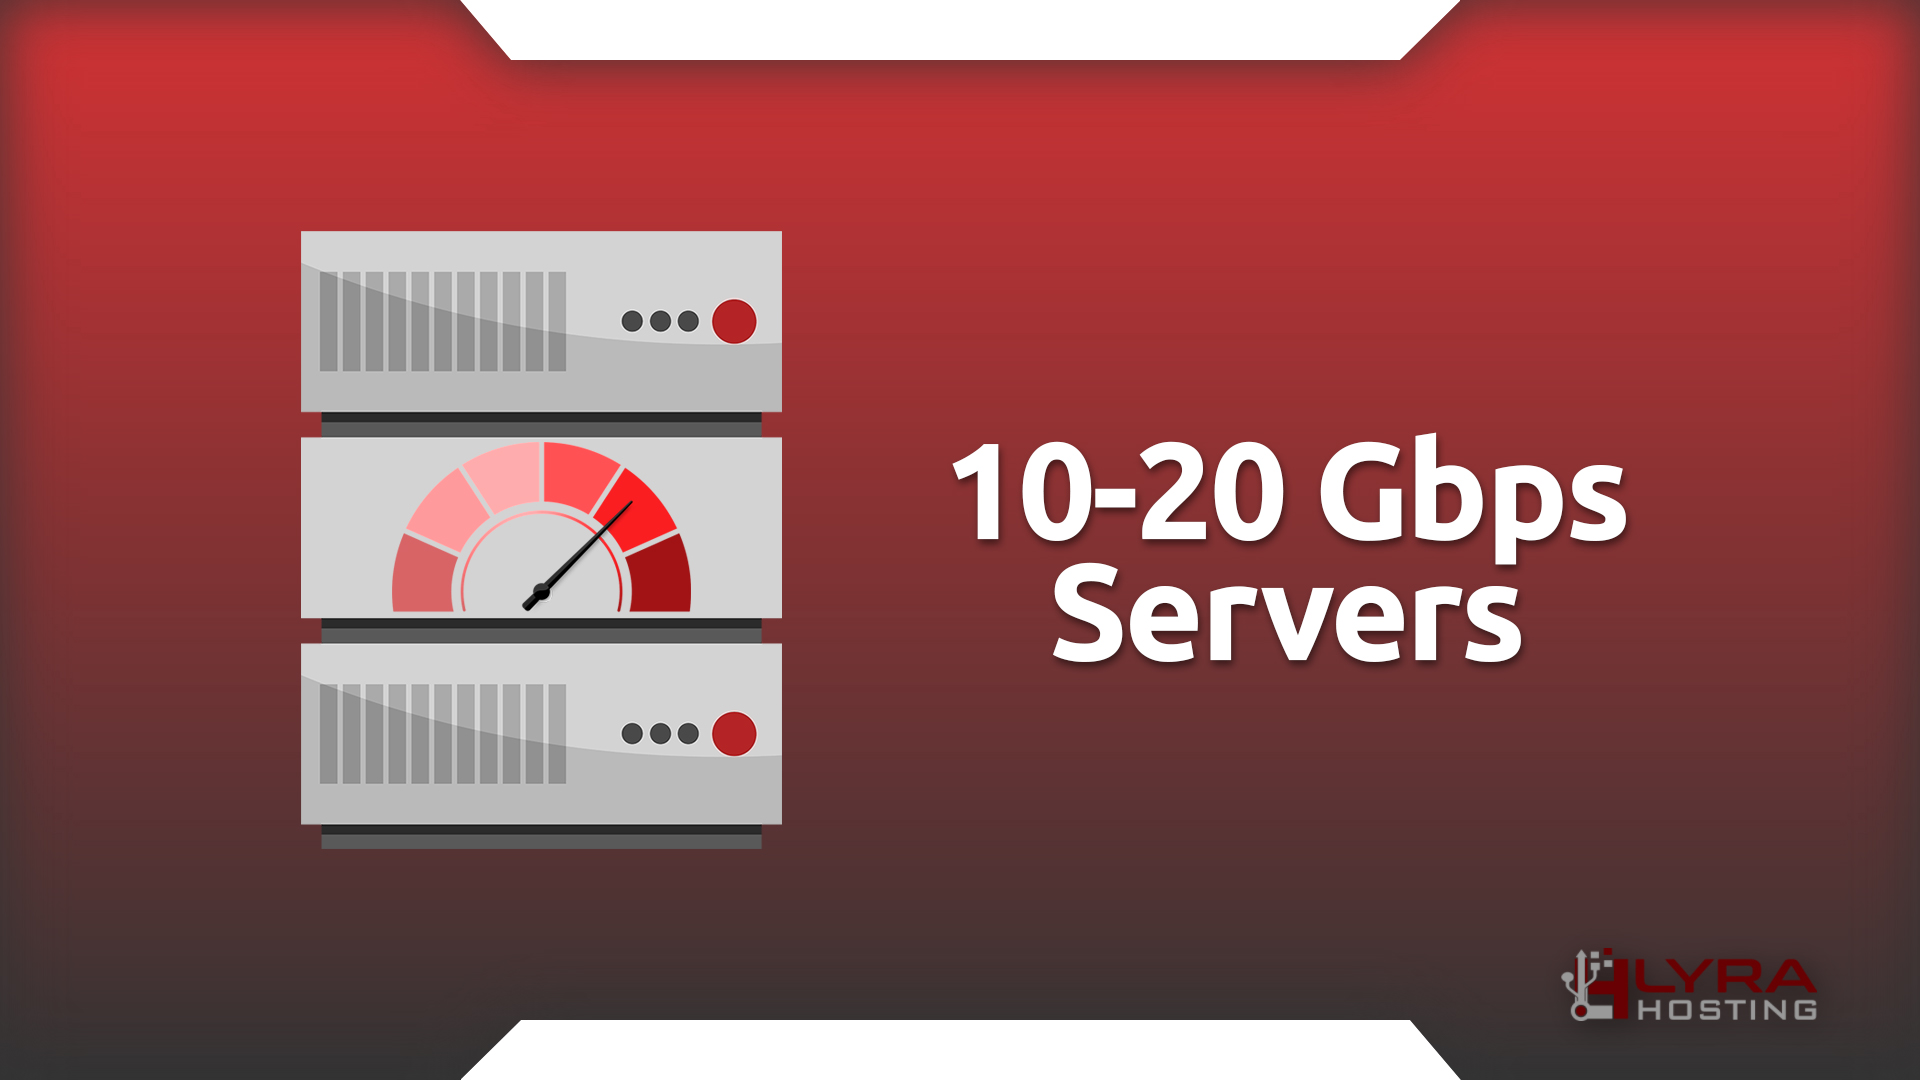 Supercharge Your Data Infrastructure with 10Gbps and 20Gbps Servers